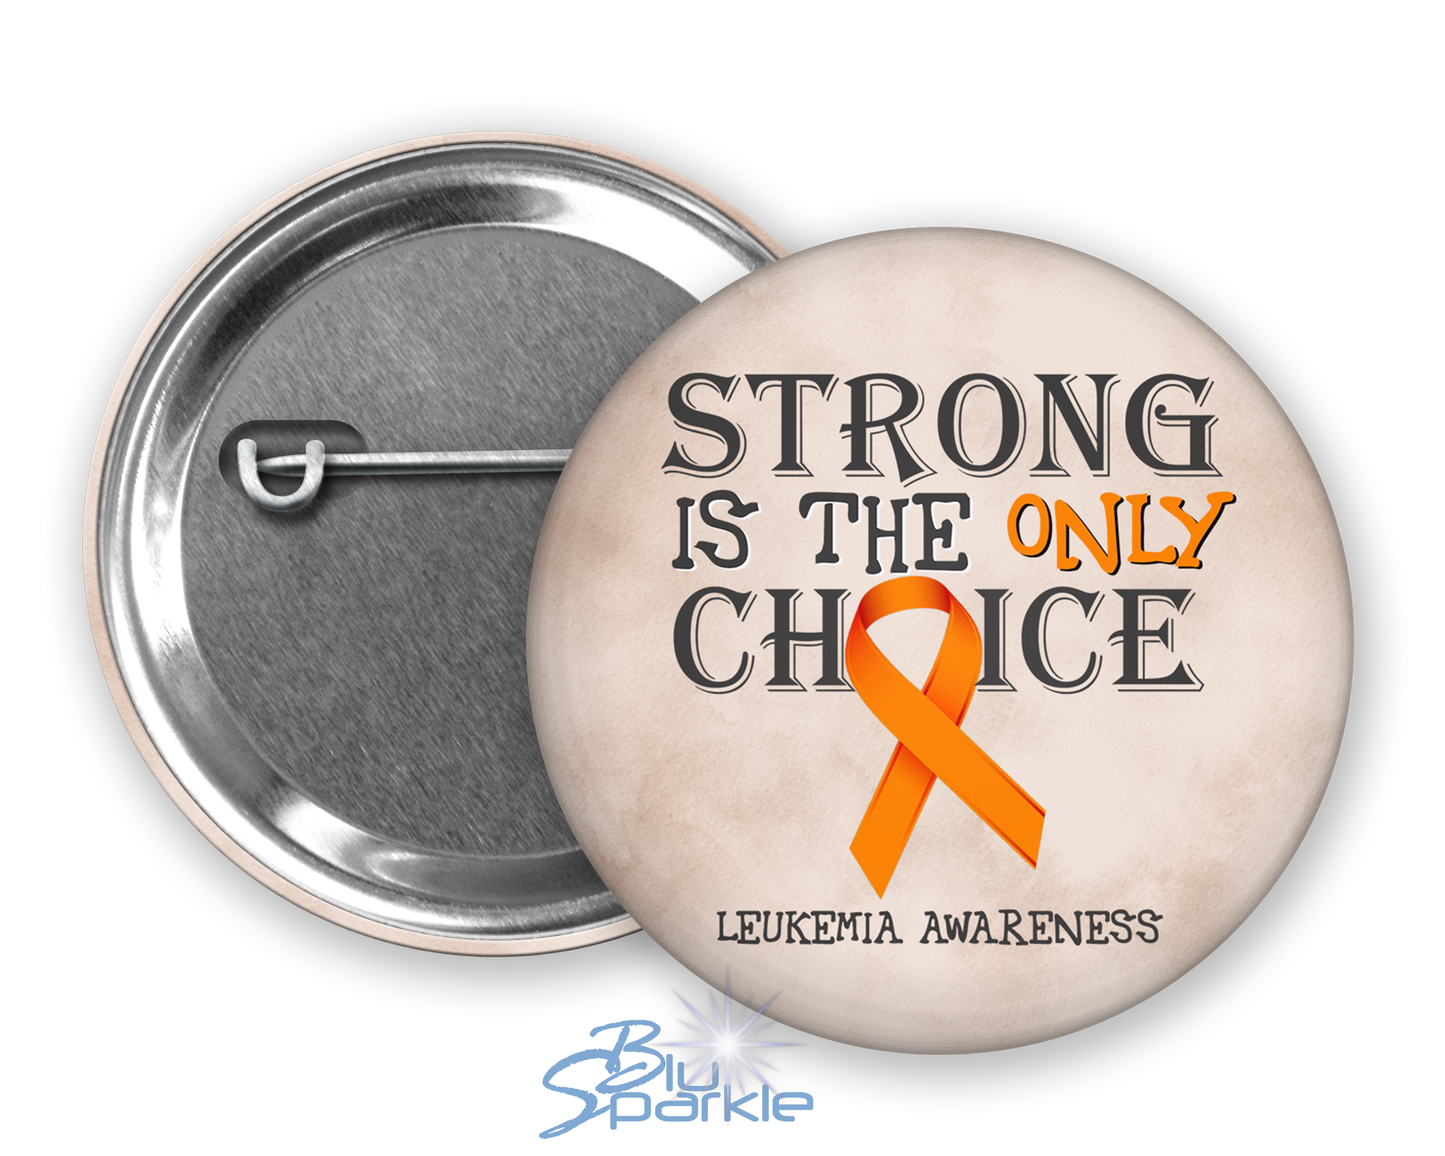 Strong is the Only Choice -Leukemia Awareness Pinback Button |x|